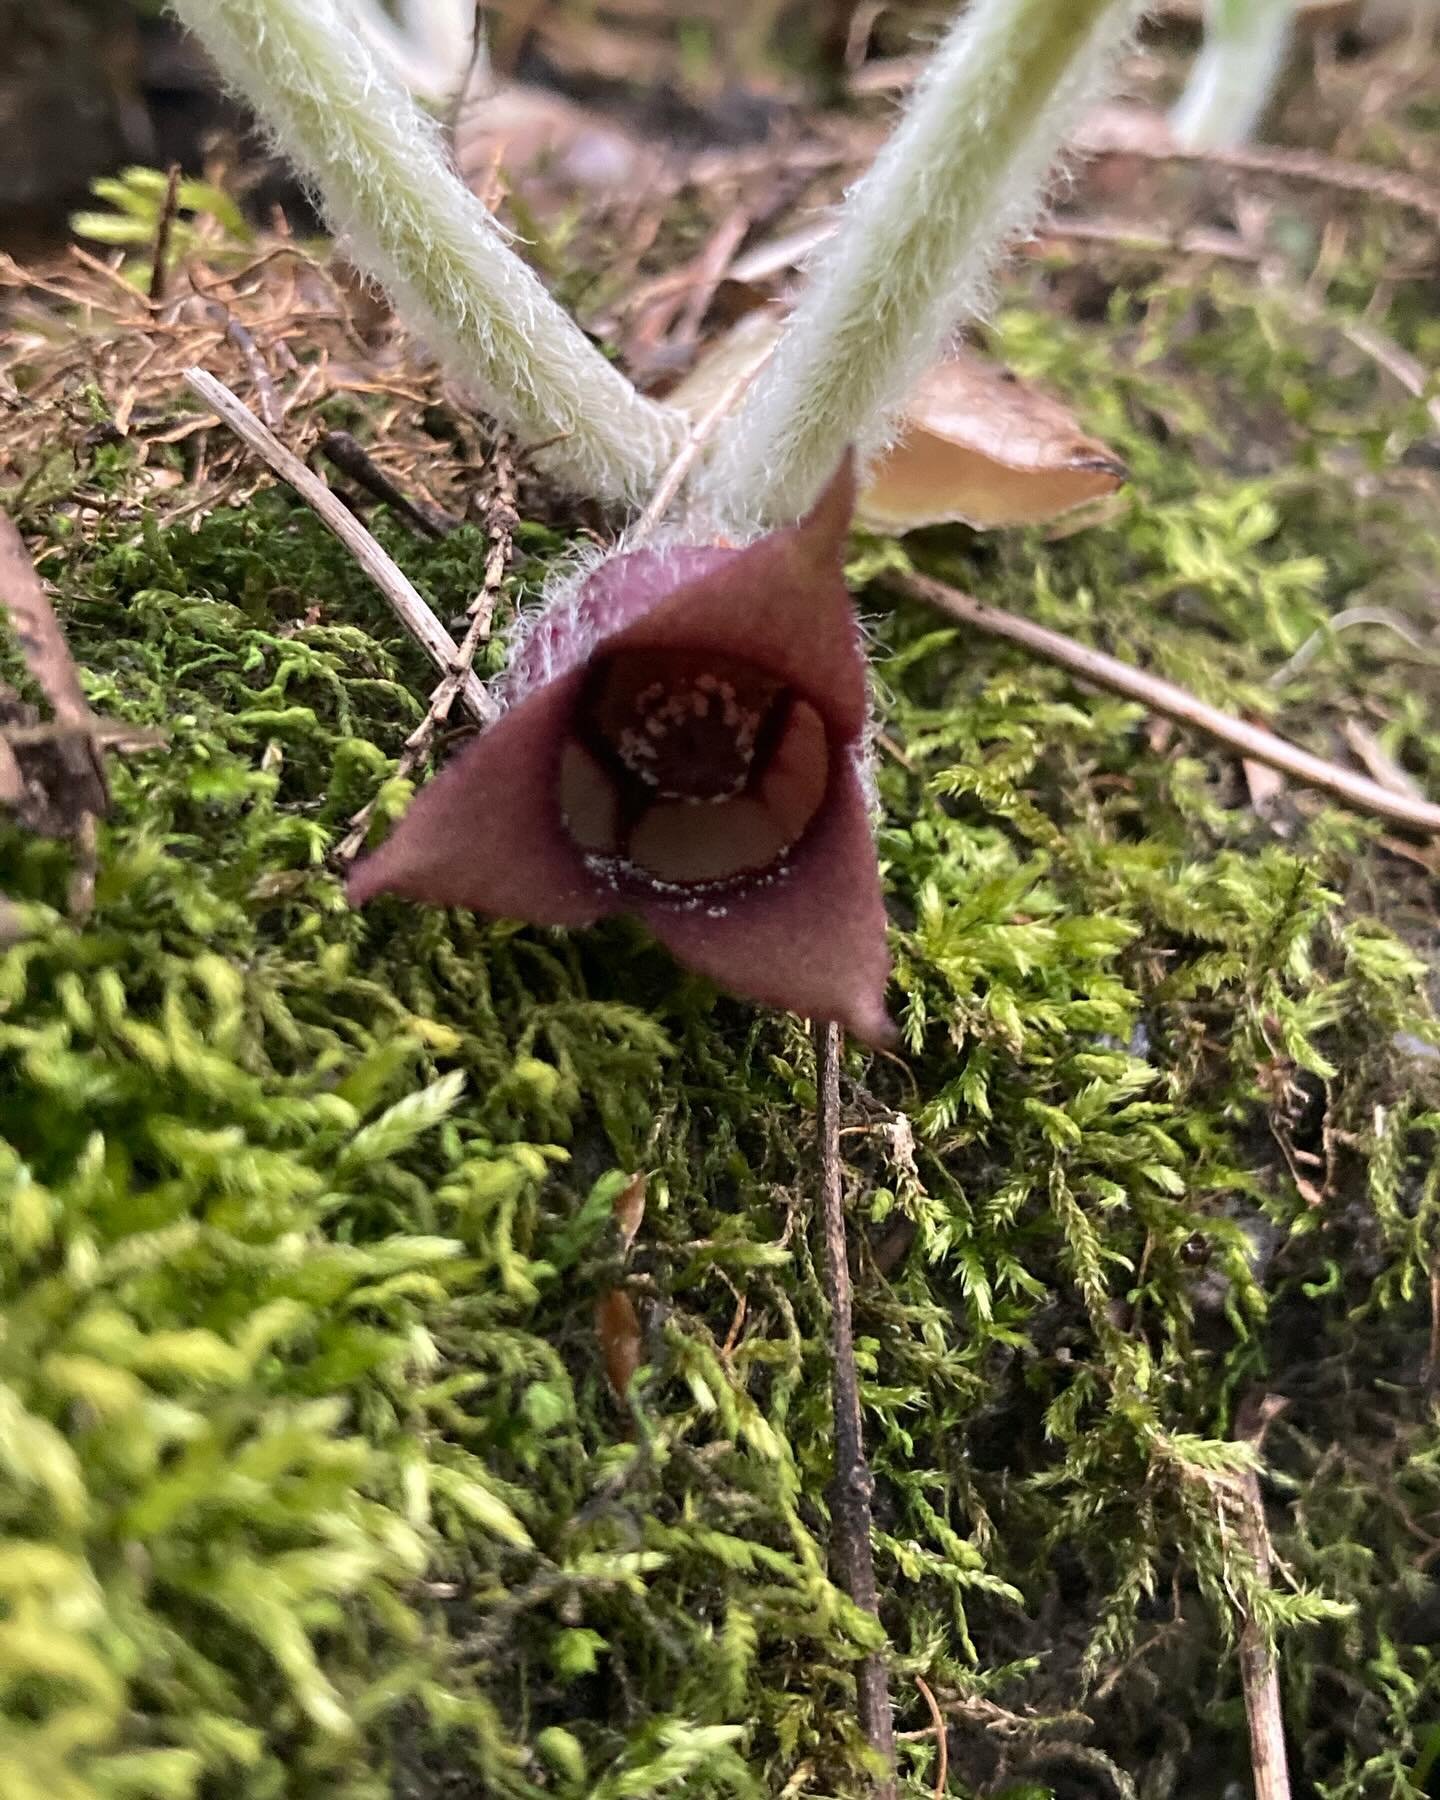 This may look like a scene from &ldquo;Stranger Things&rdquo; but it&rsquo;s actually another early spring flower in the Eastern woods! Can you identify it? Photo 2 shows the leaves.